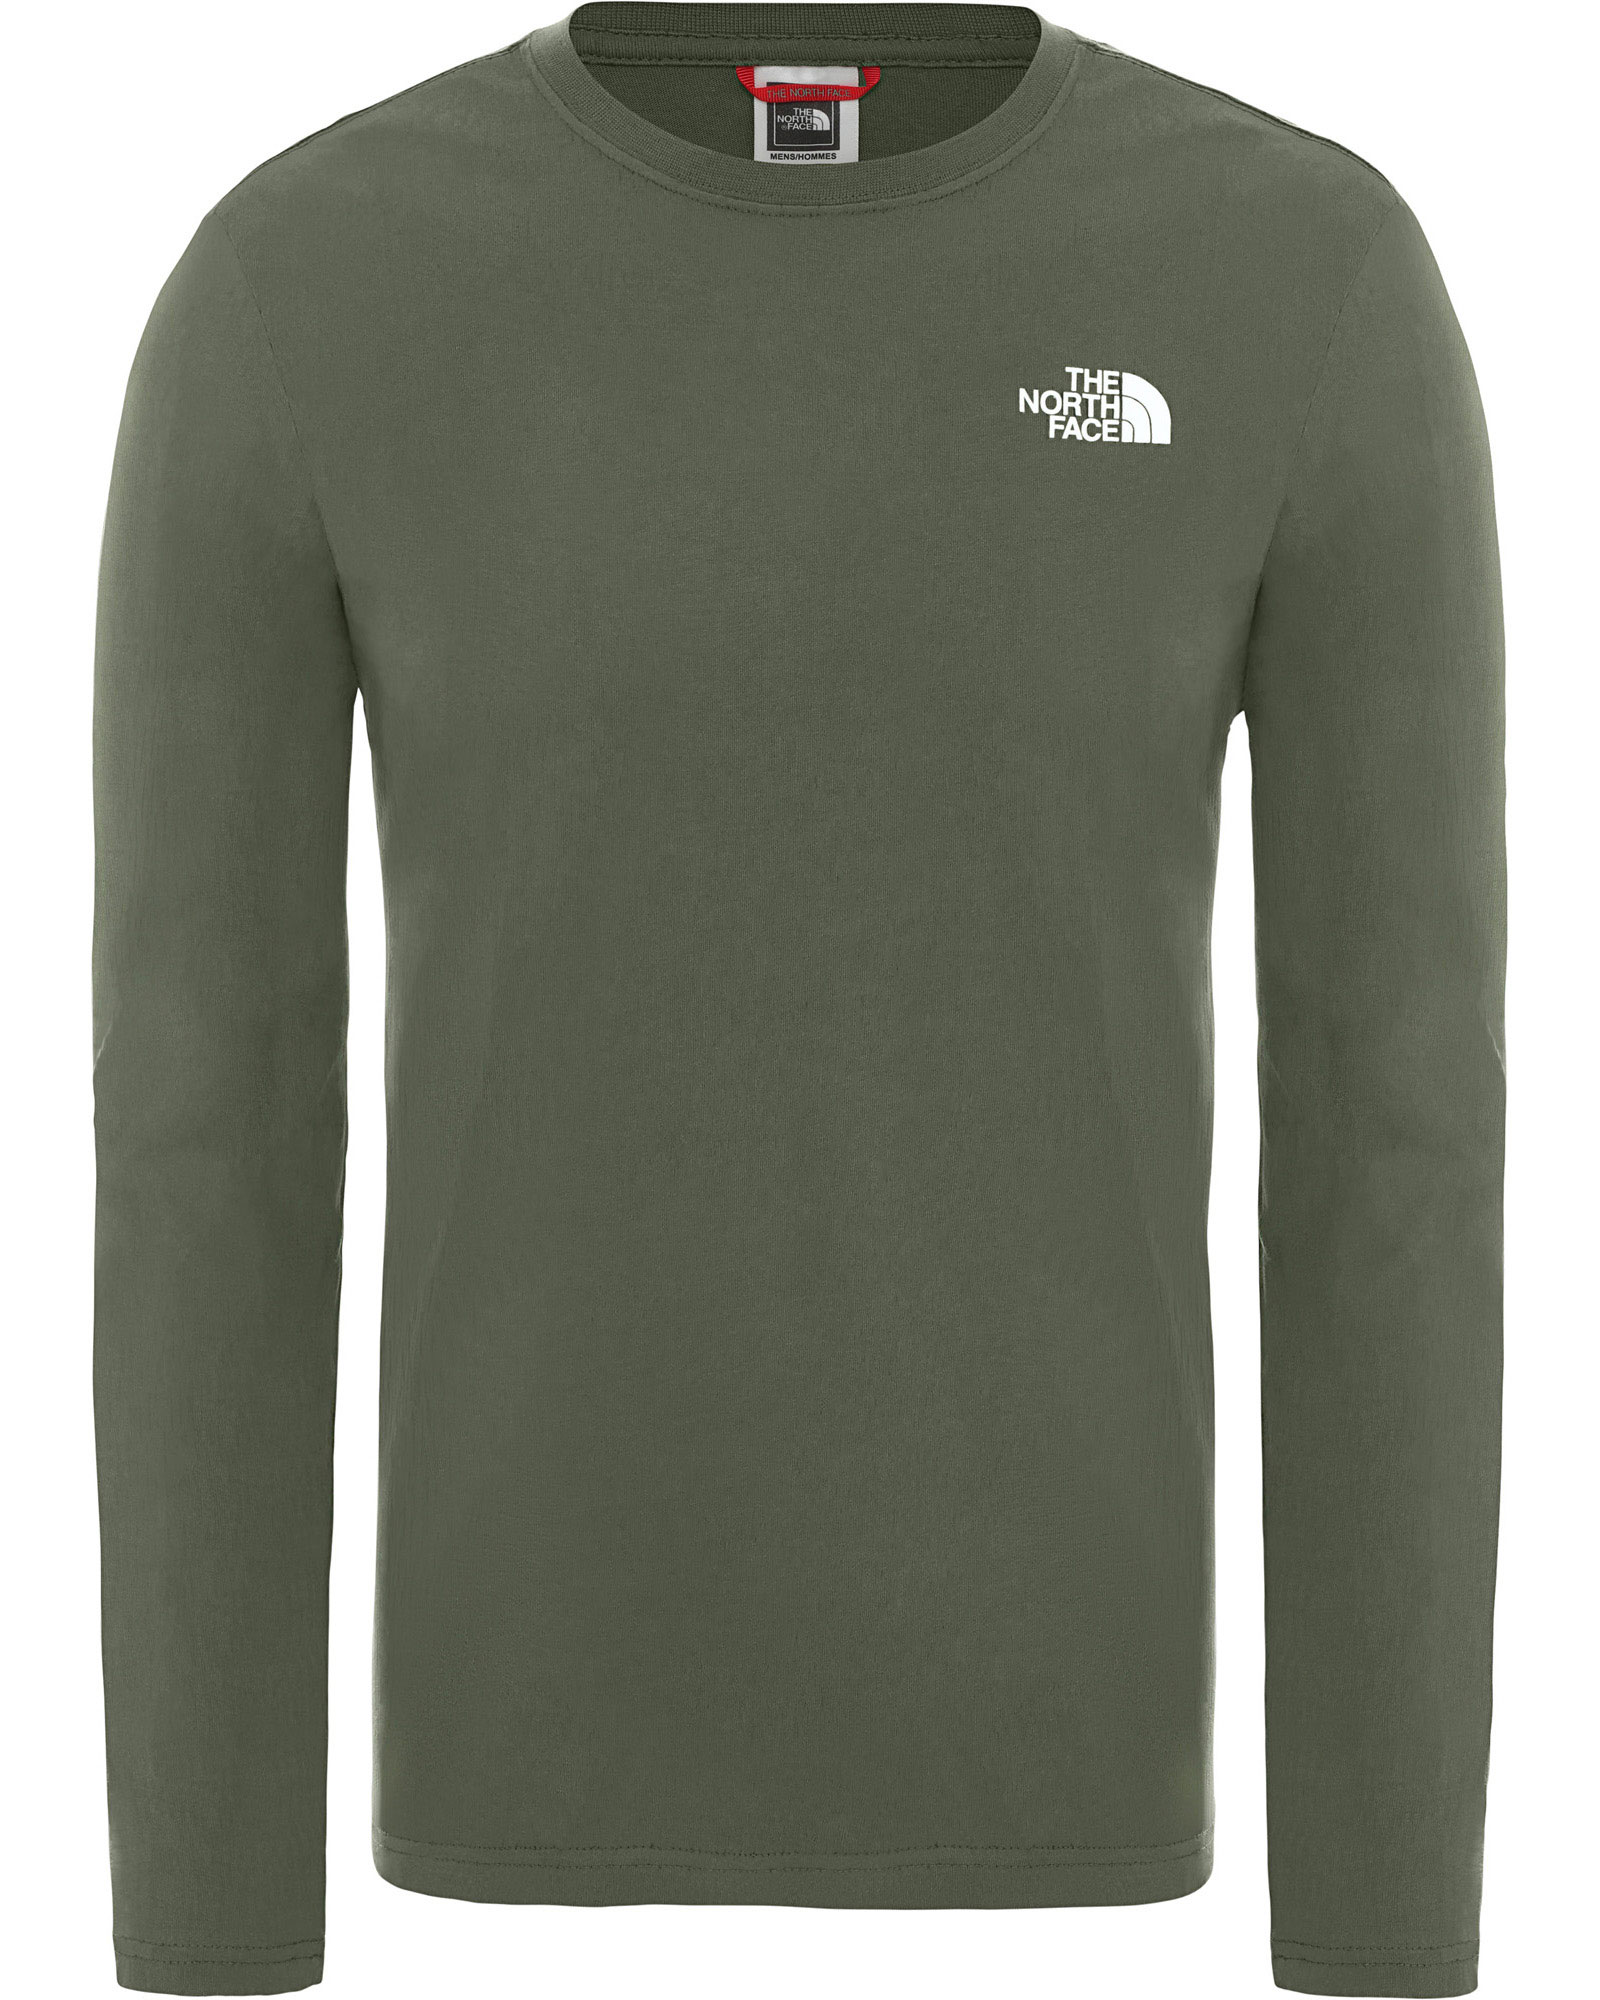 The North Face Red Box Men’s Long Sleeve T Shirt - Thyme XS